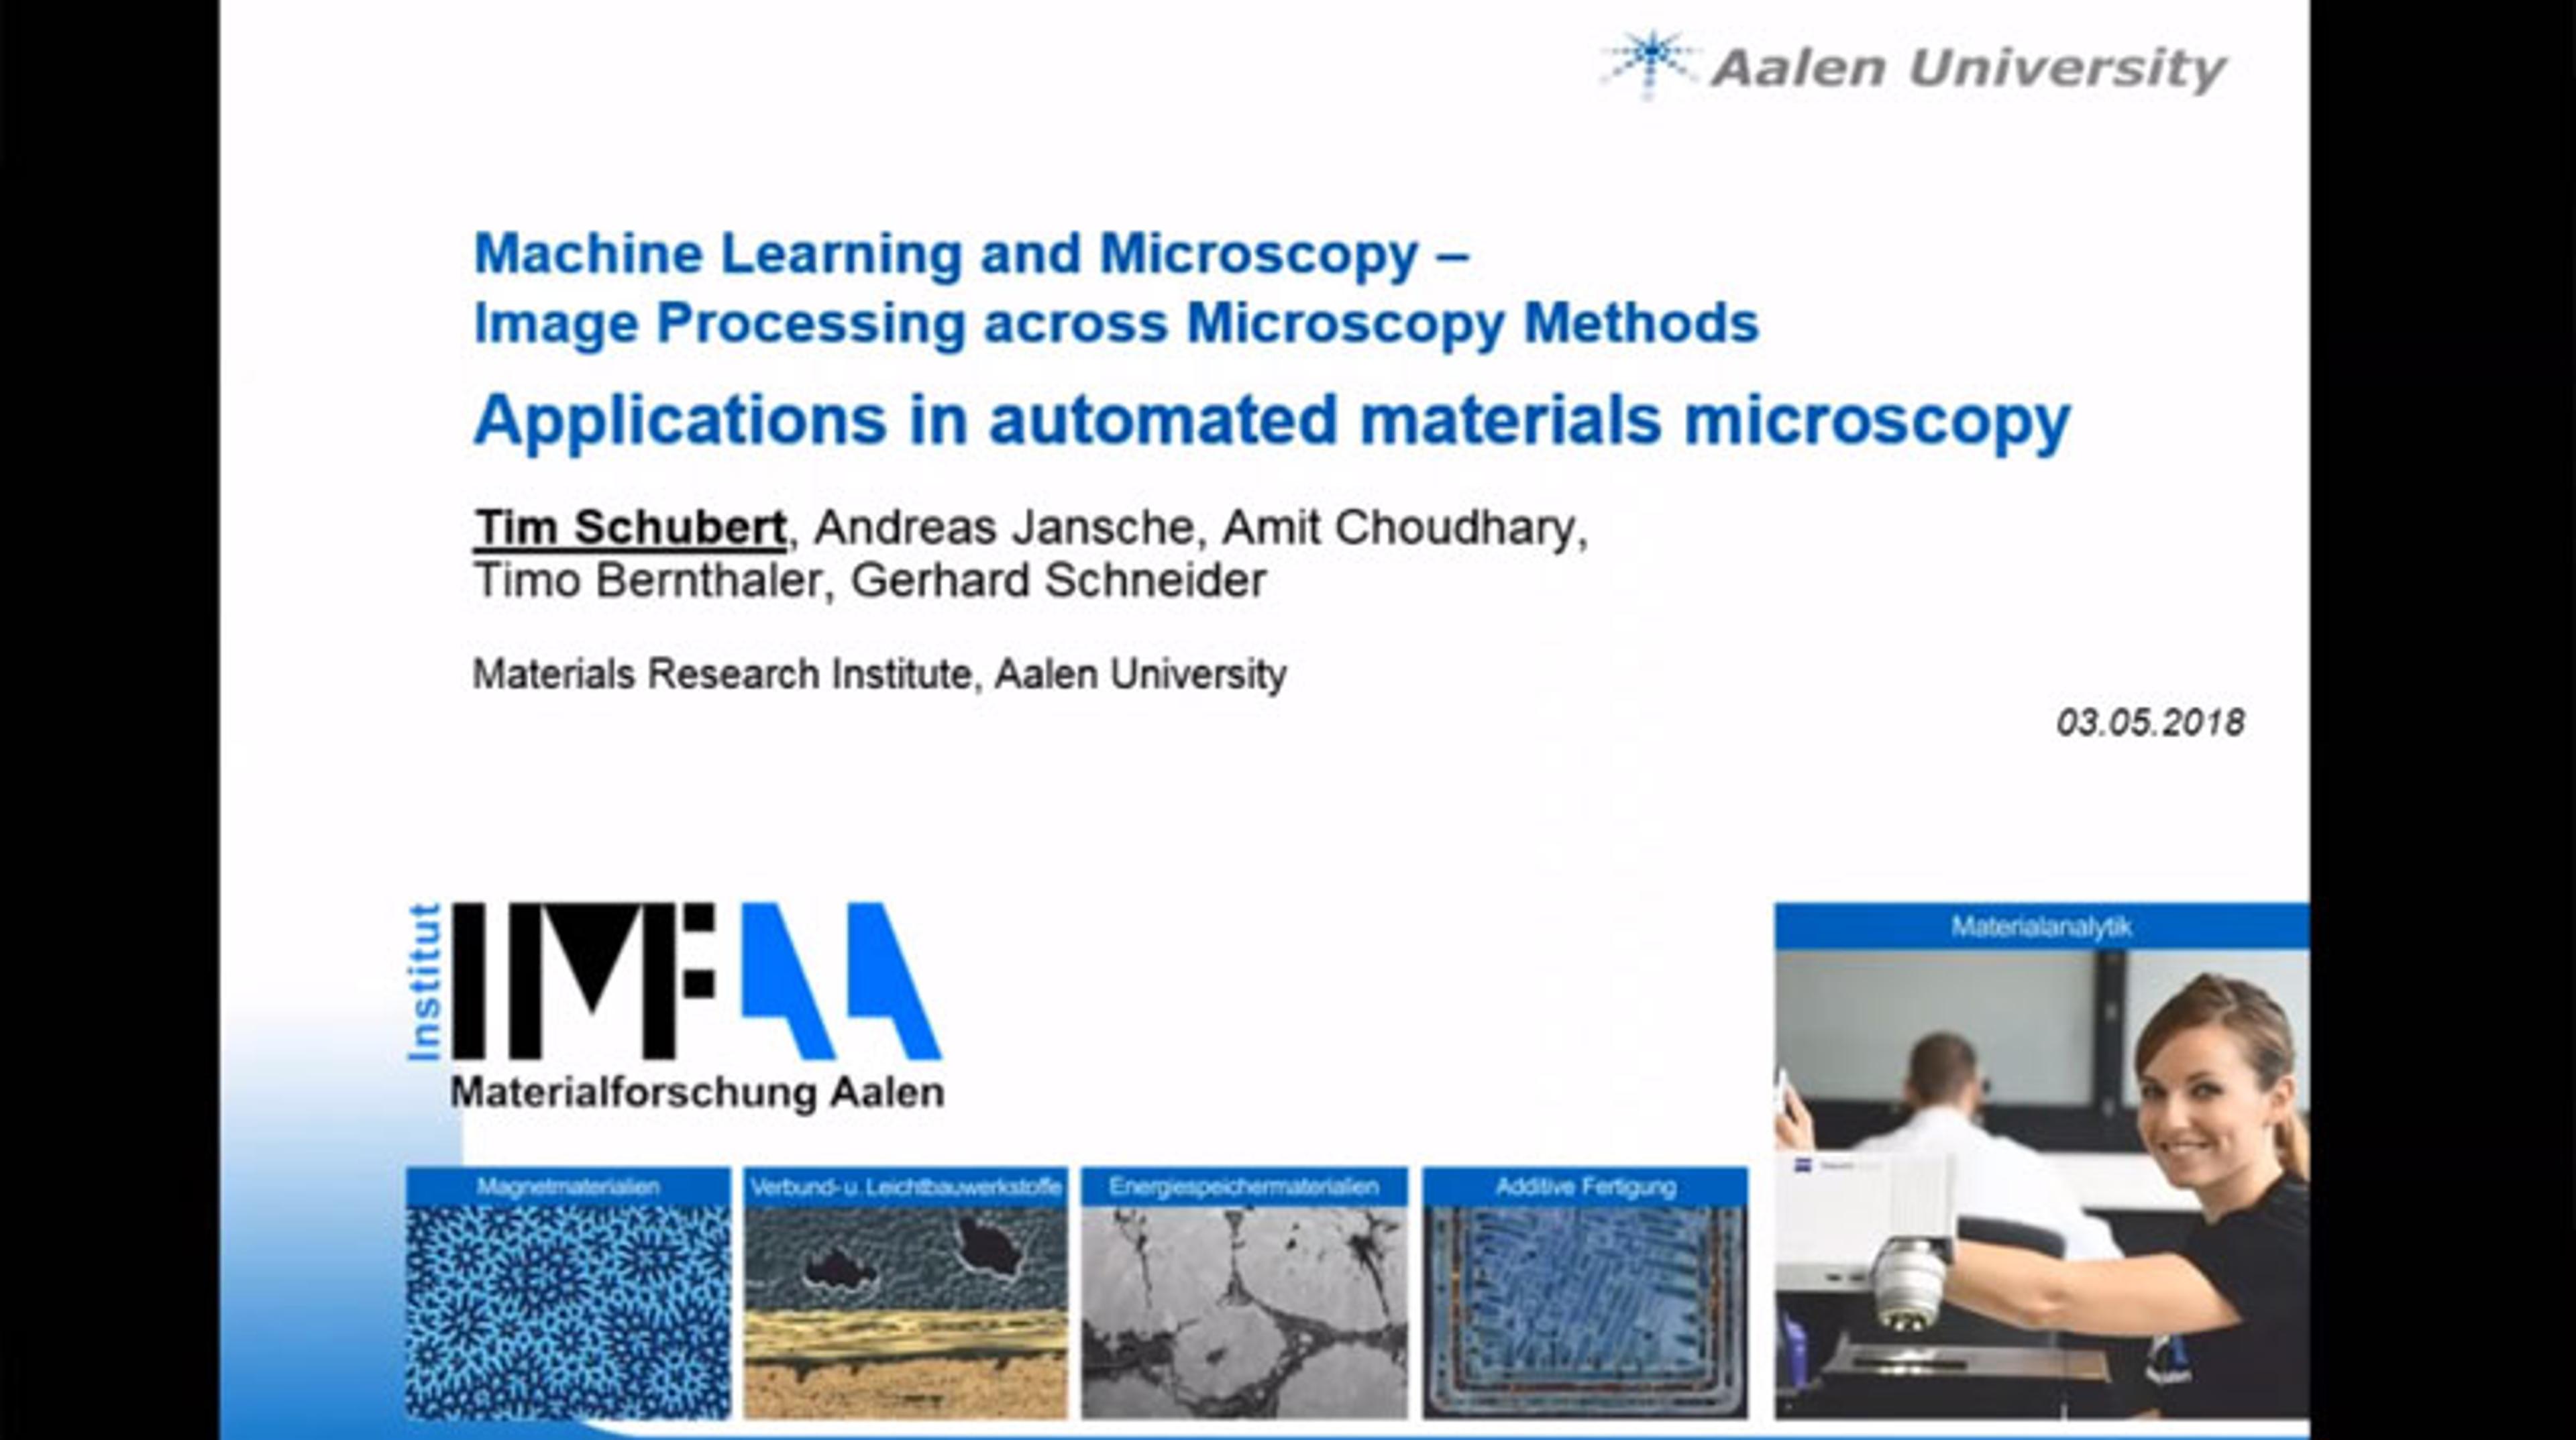 Webinar: How Machine Learning Software Can Accelerate Microscopy Image Analysis